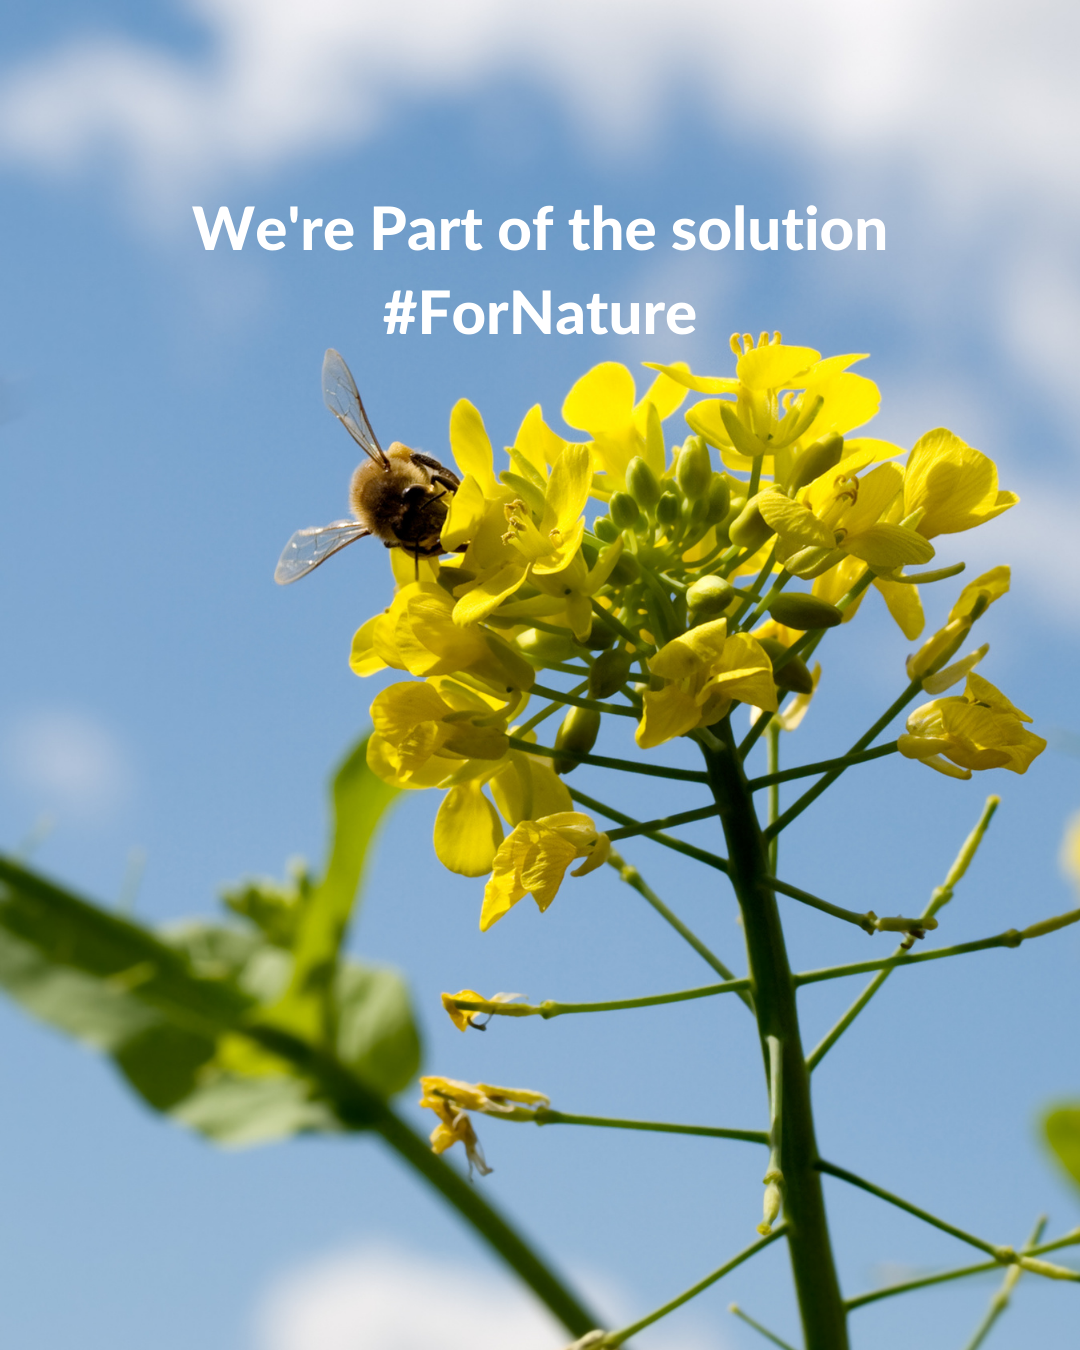 Biological Diversity - We're part of the solution.